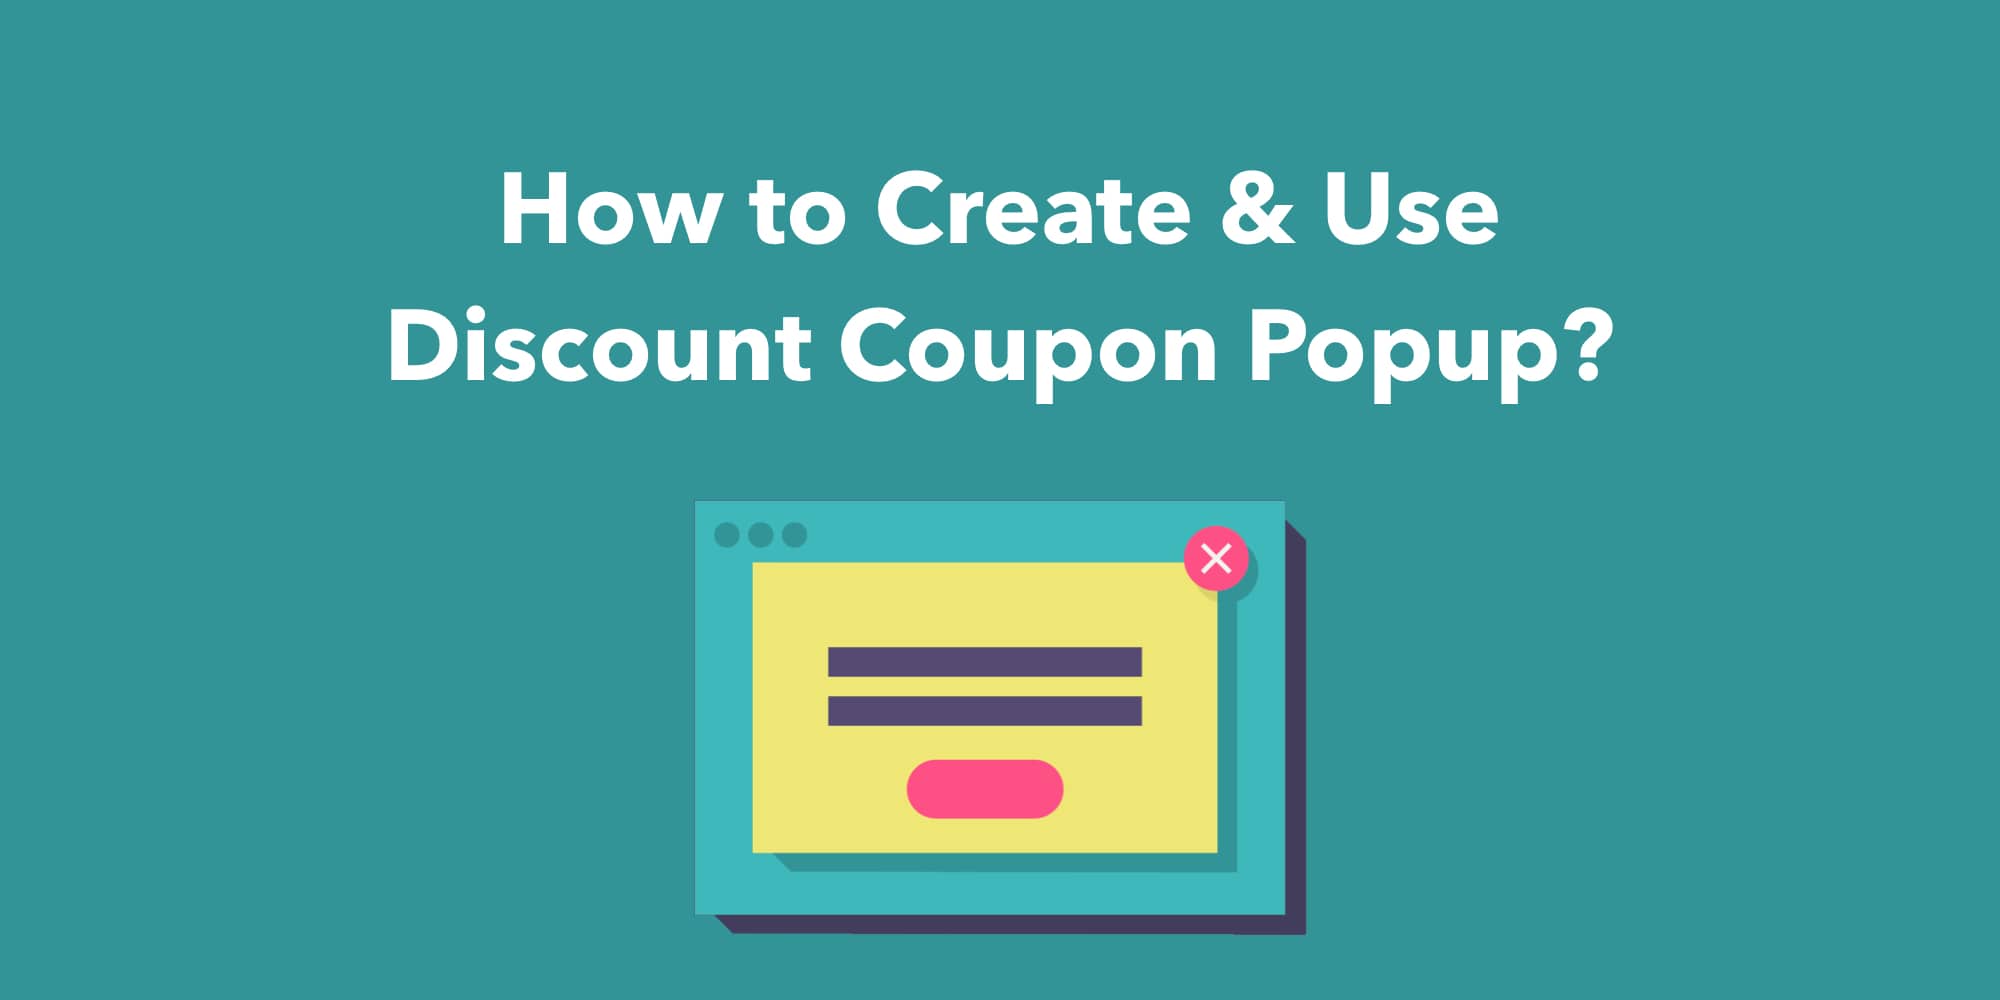 How to Create & Use Discount Coupon Popup?